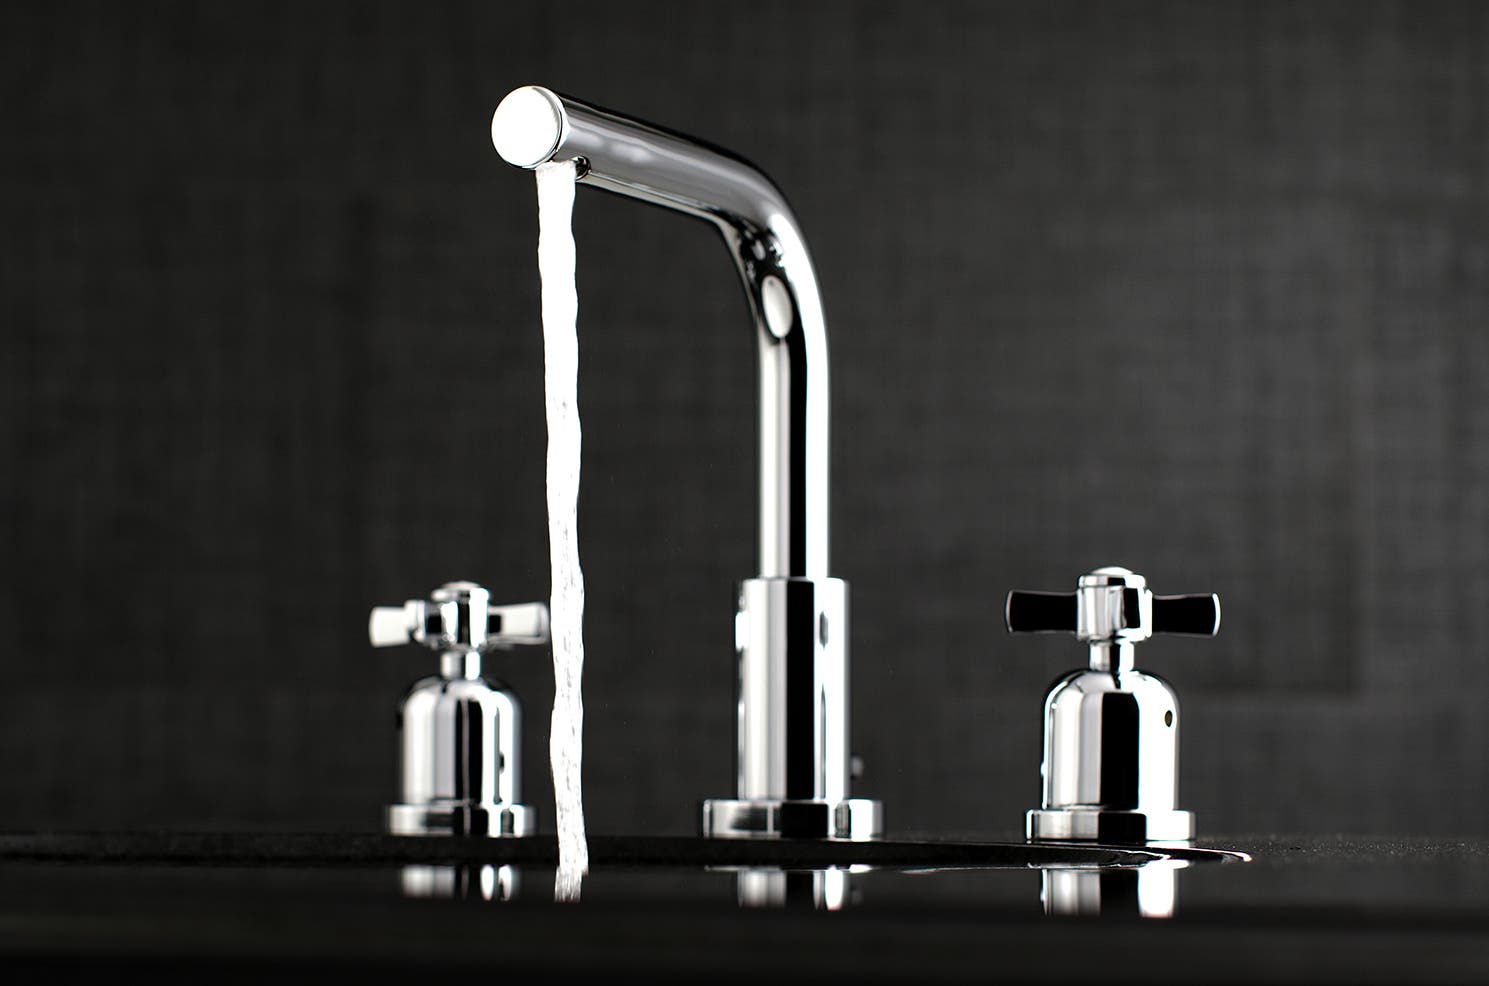 New Millennium Faucets Released, FSC895xZX Family